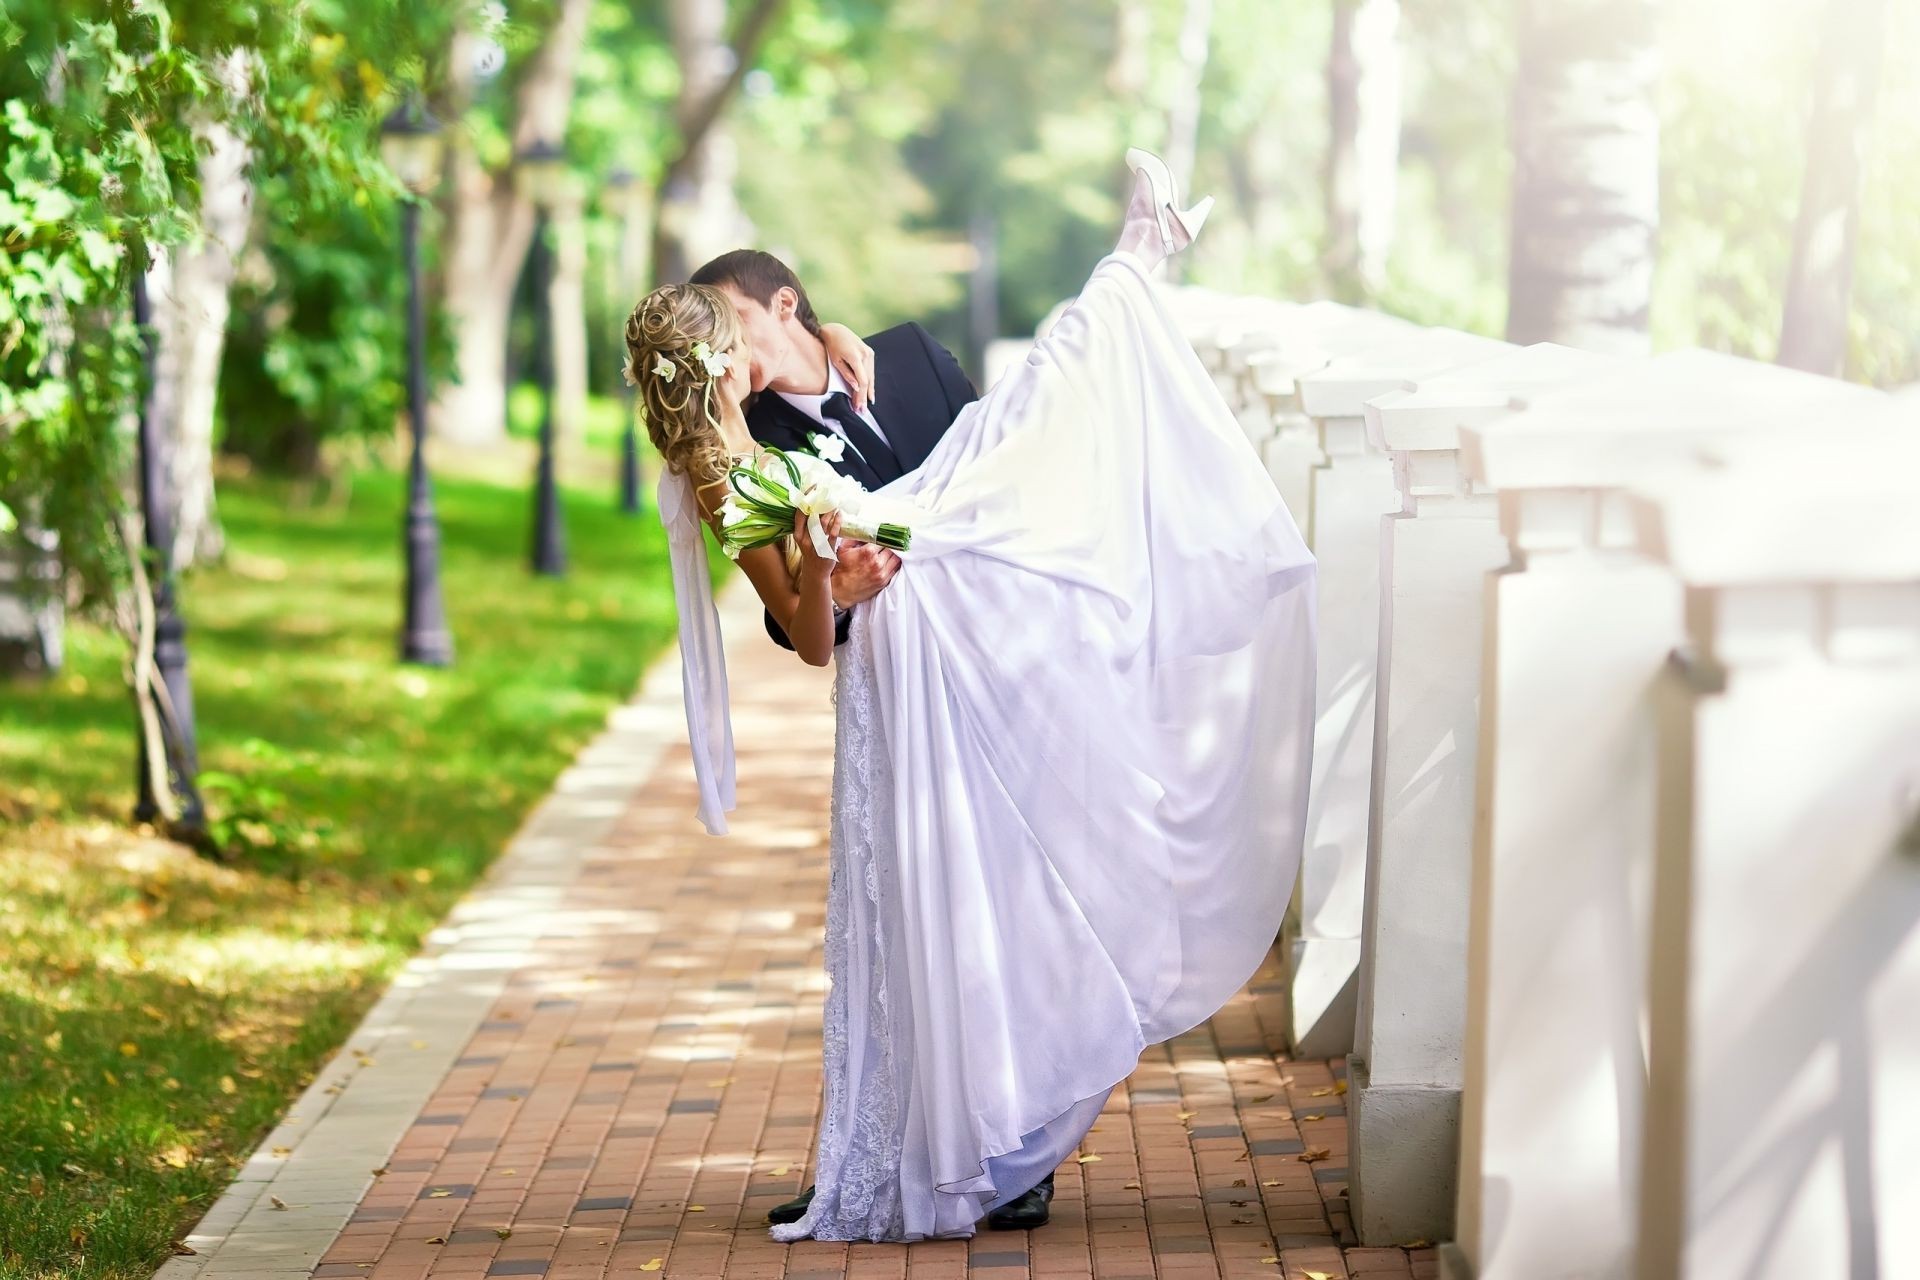 love and romance outdoors nature wedding summer woman love bride veil relaxation leisure marriage young man fair weather groom